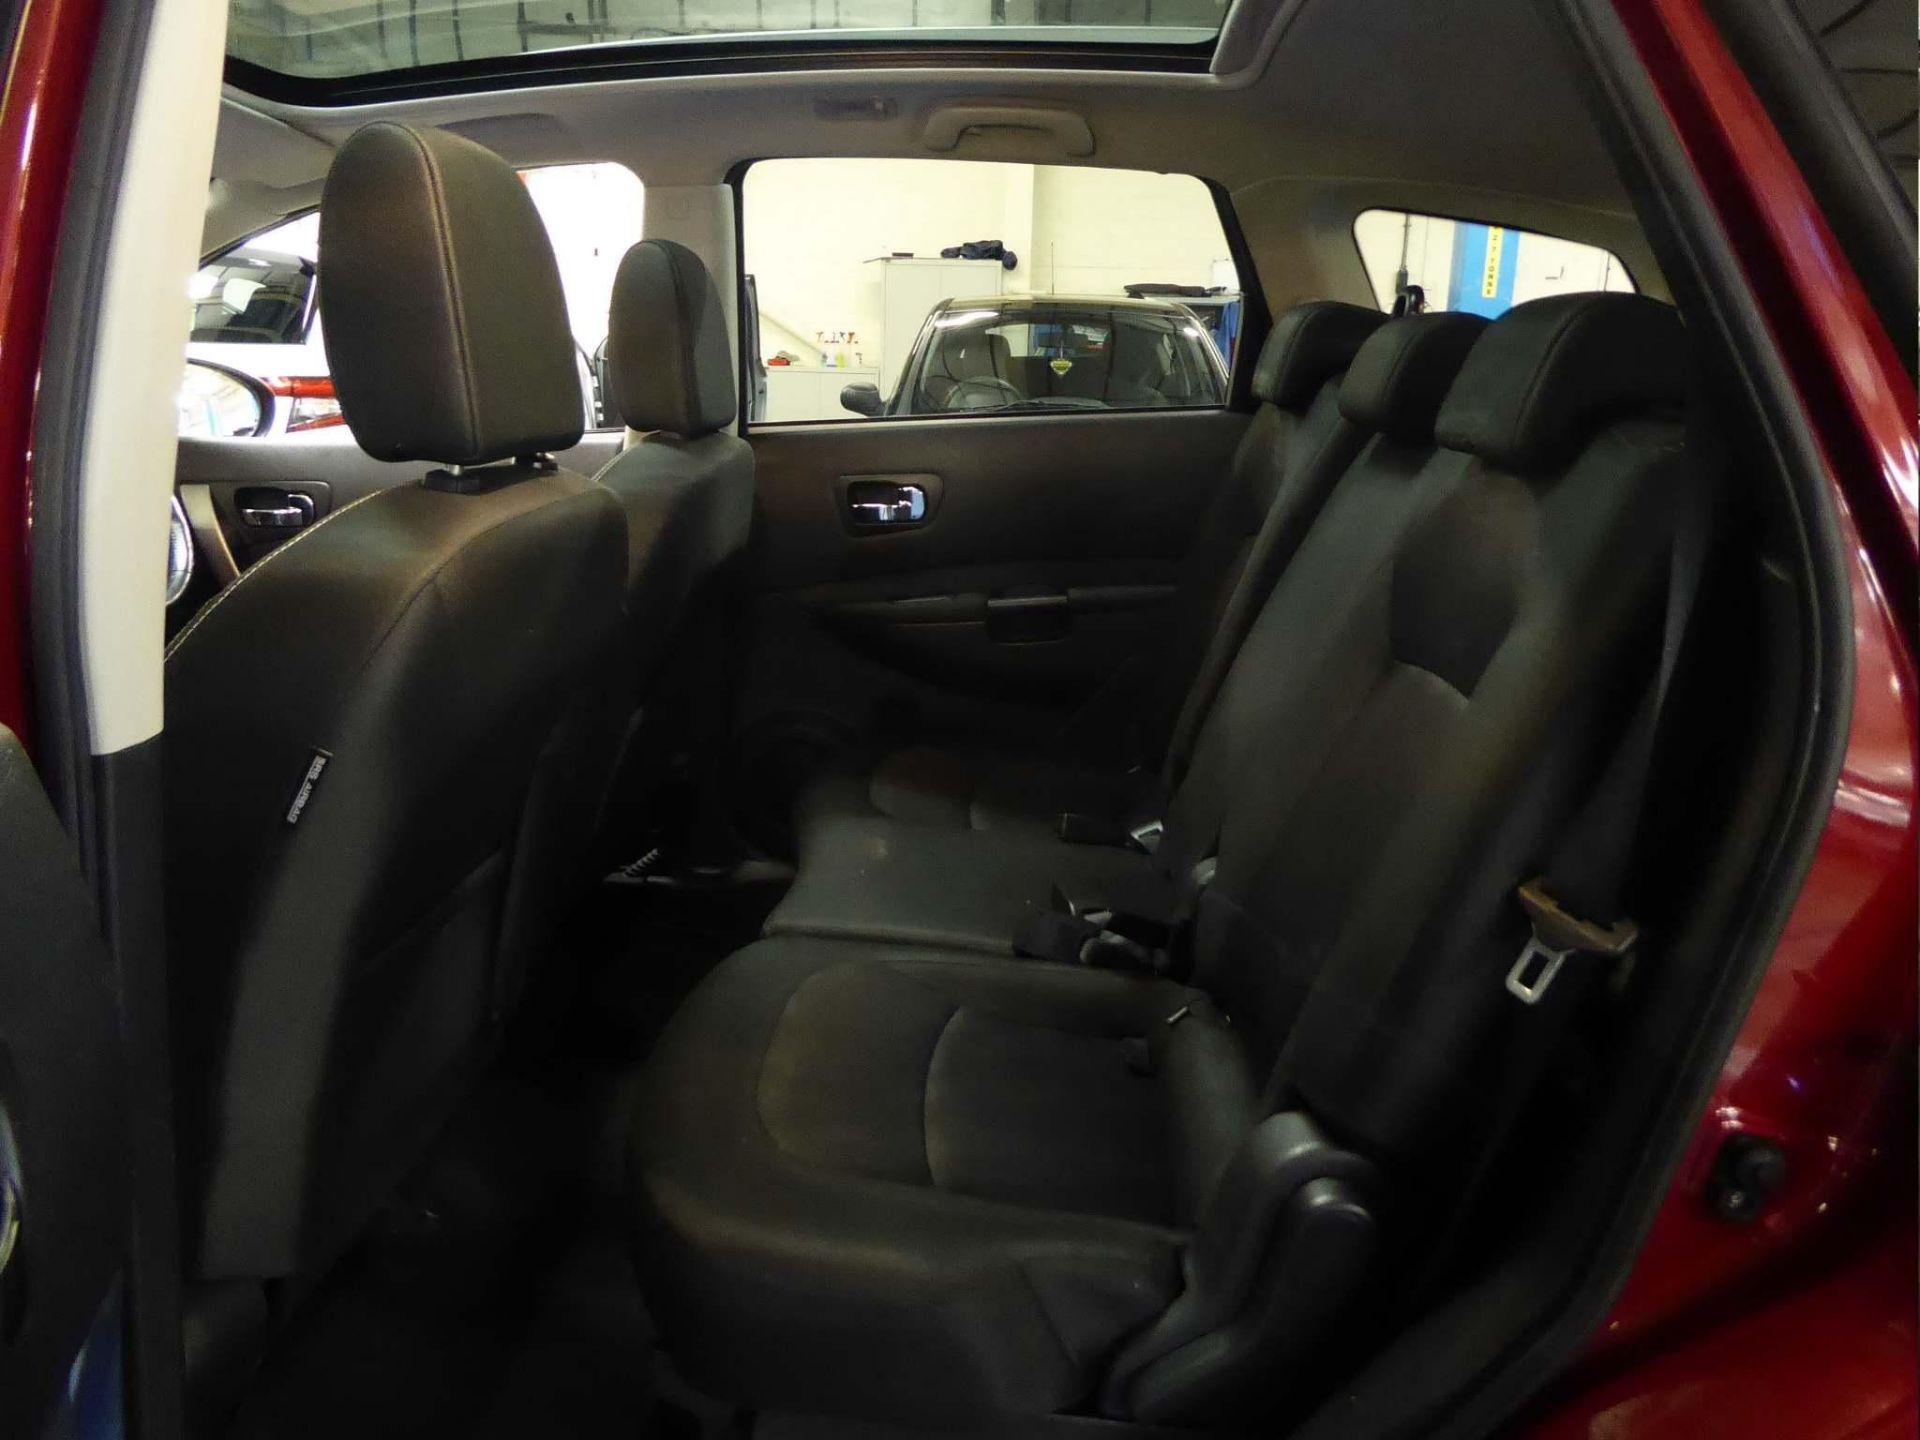 2012 Nissan Qashqai +2 N - Tech+Dci 5Dr 7-Seater SUV - CL505 - NO VAT ON THE HAMMER - - Image 18 of 24